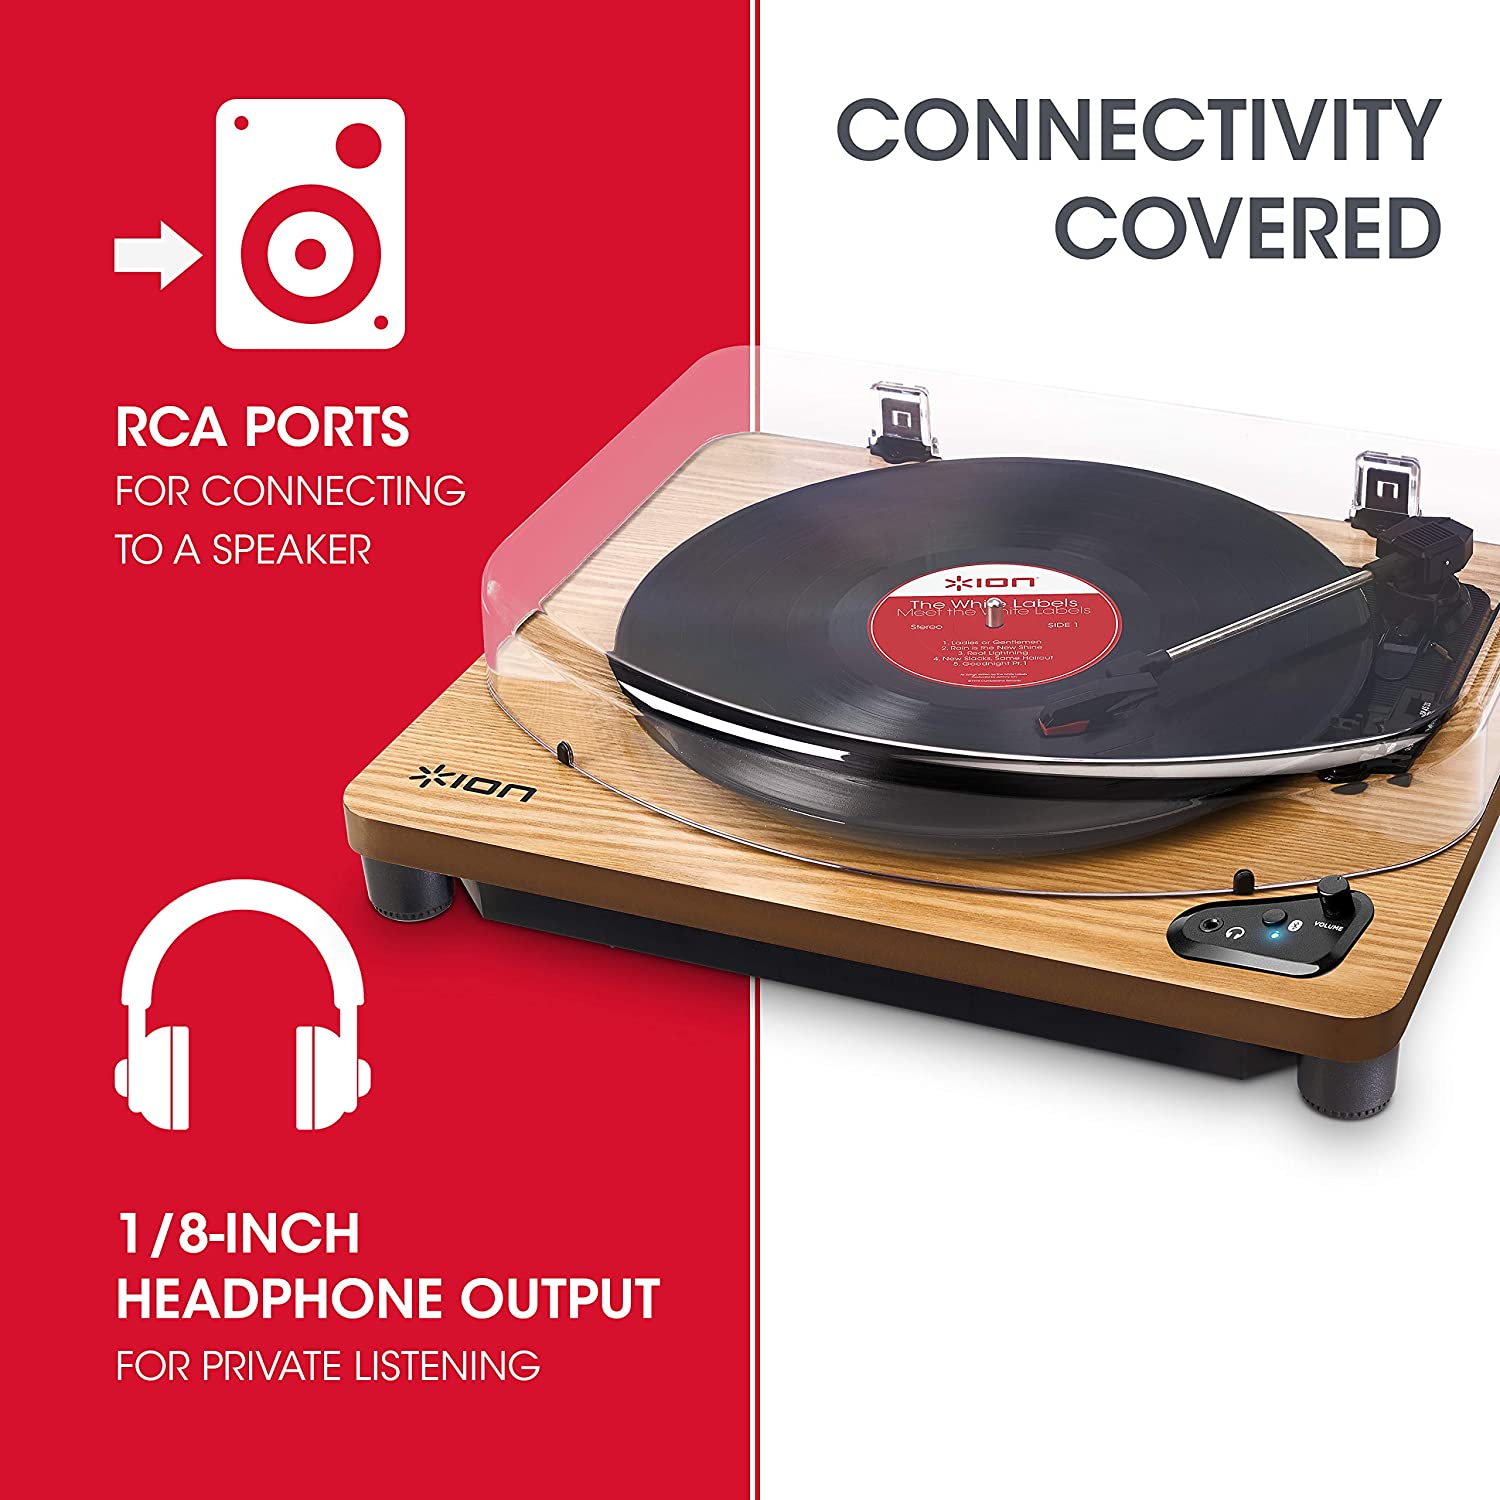 ION Air LP Wireless Streaming Turntable - Wood Finish - Grade A